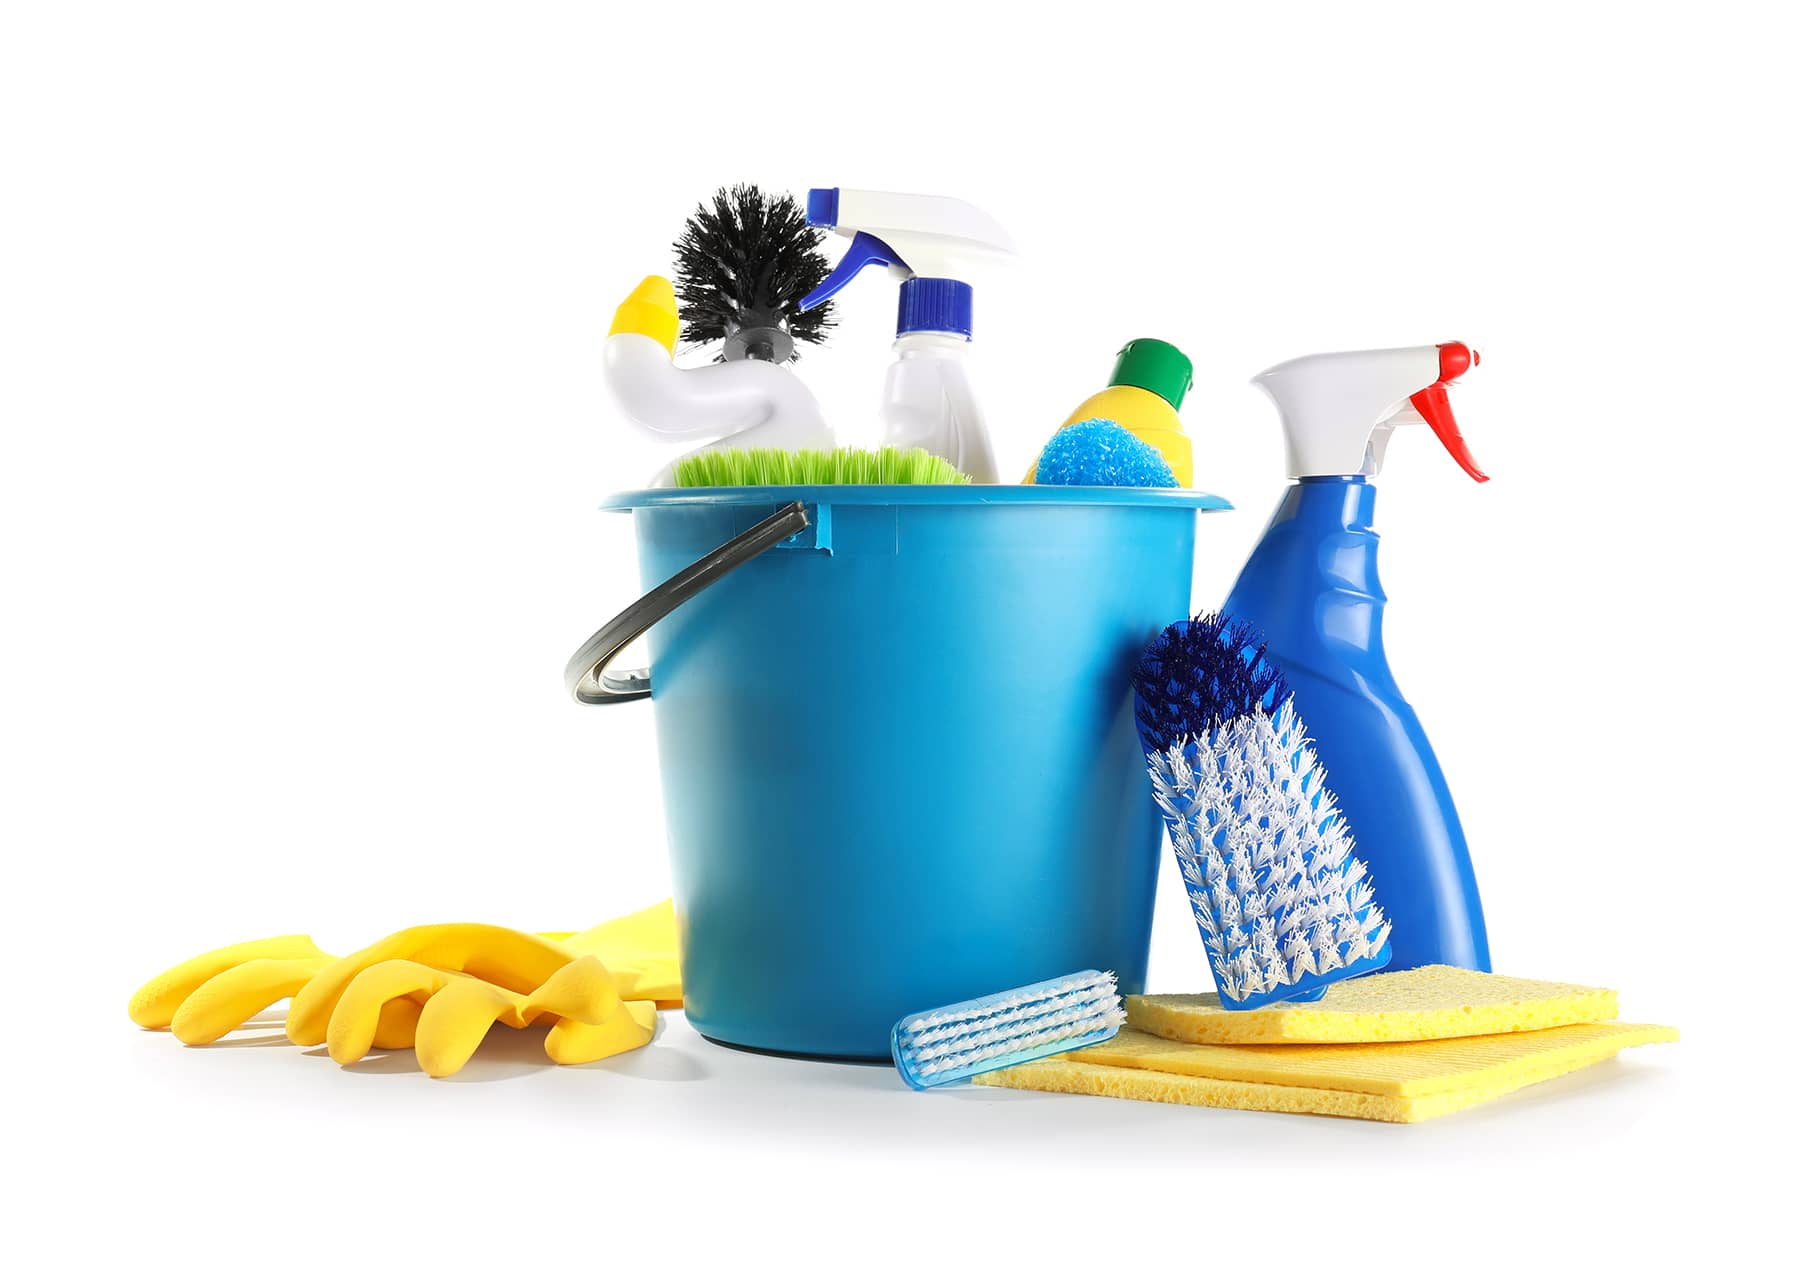 20 Essential Cleaning Supplies For Your First Apartment - Basically Becca  Sue